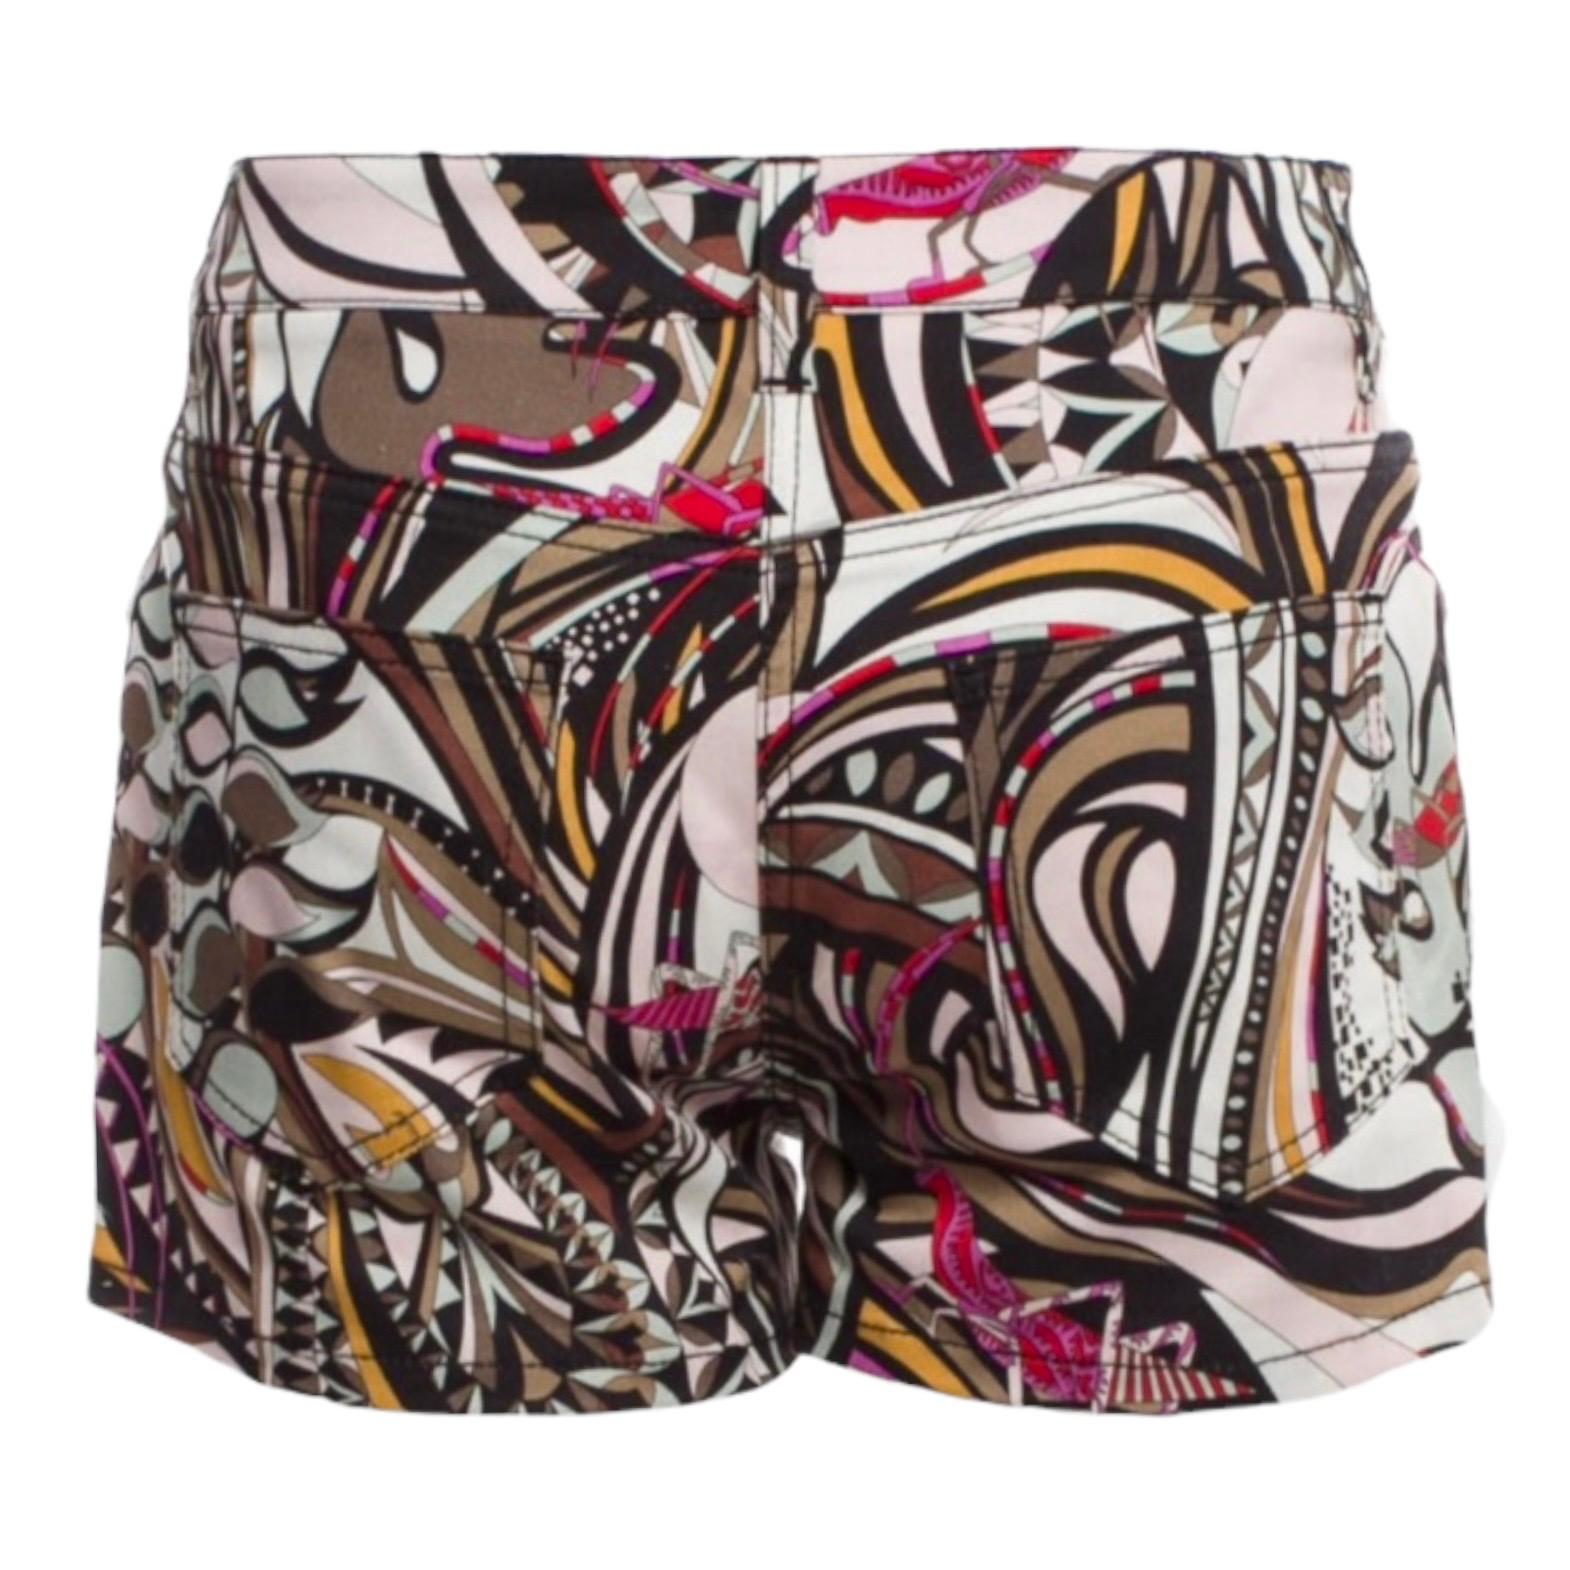 A stunning shorts by Emilio Pucci
This shorts are designed with the famous Emilio Pucci signature print
